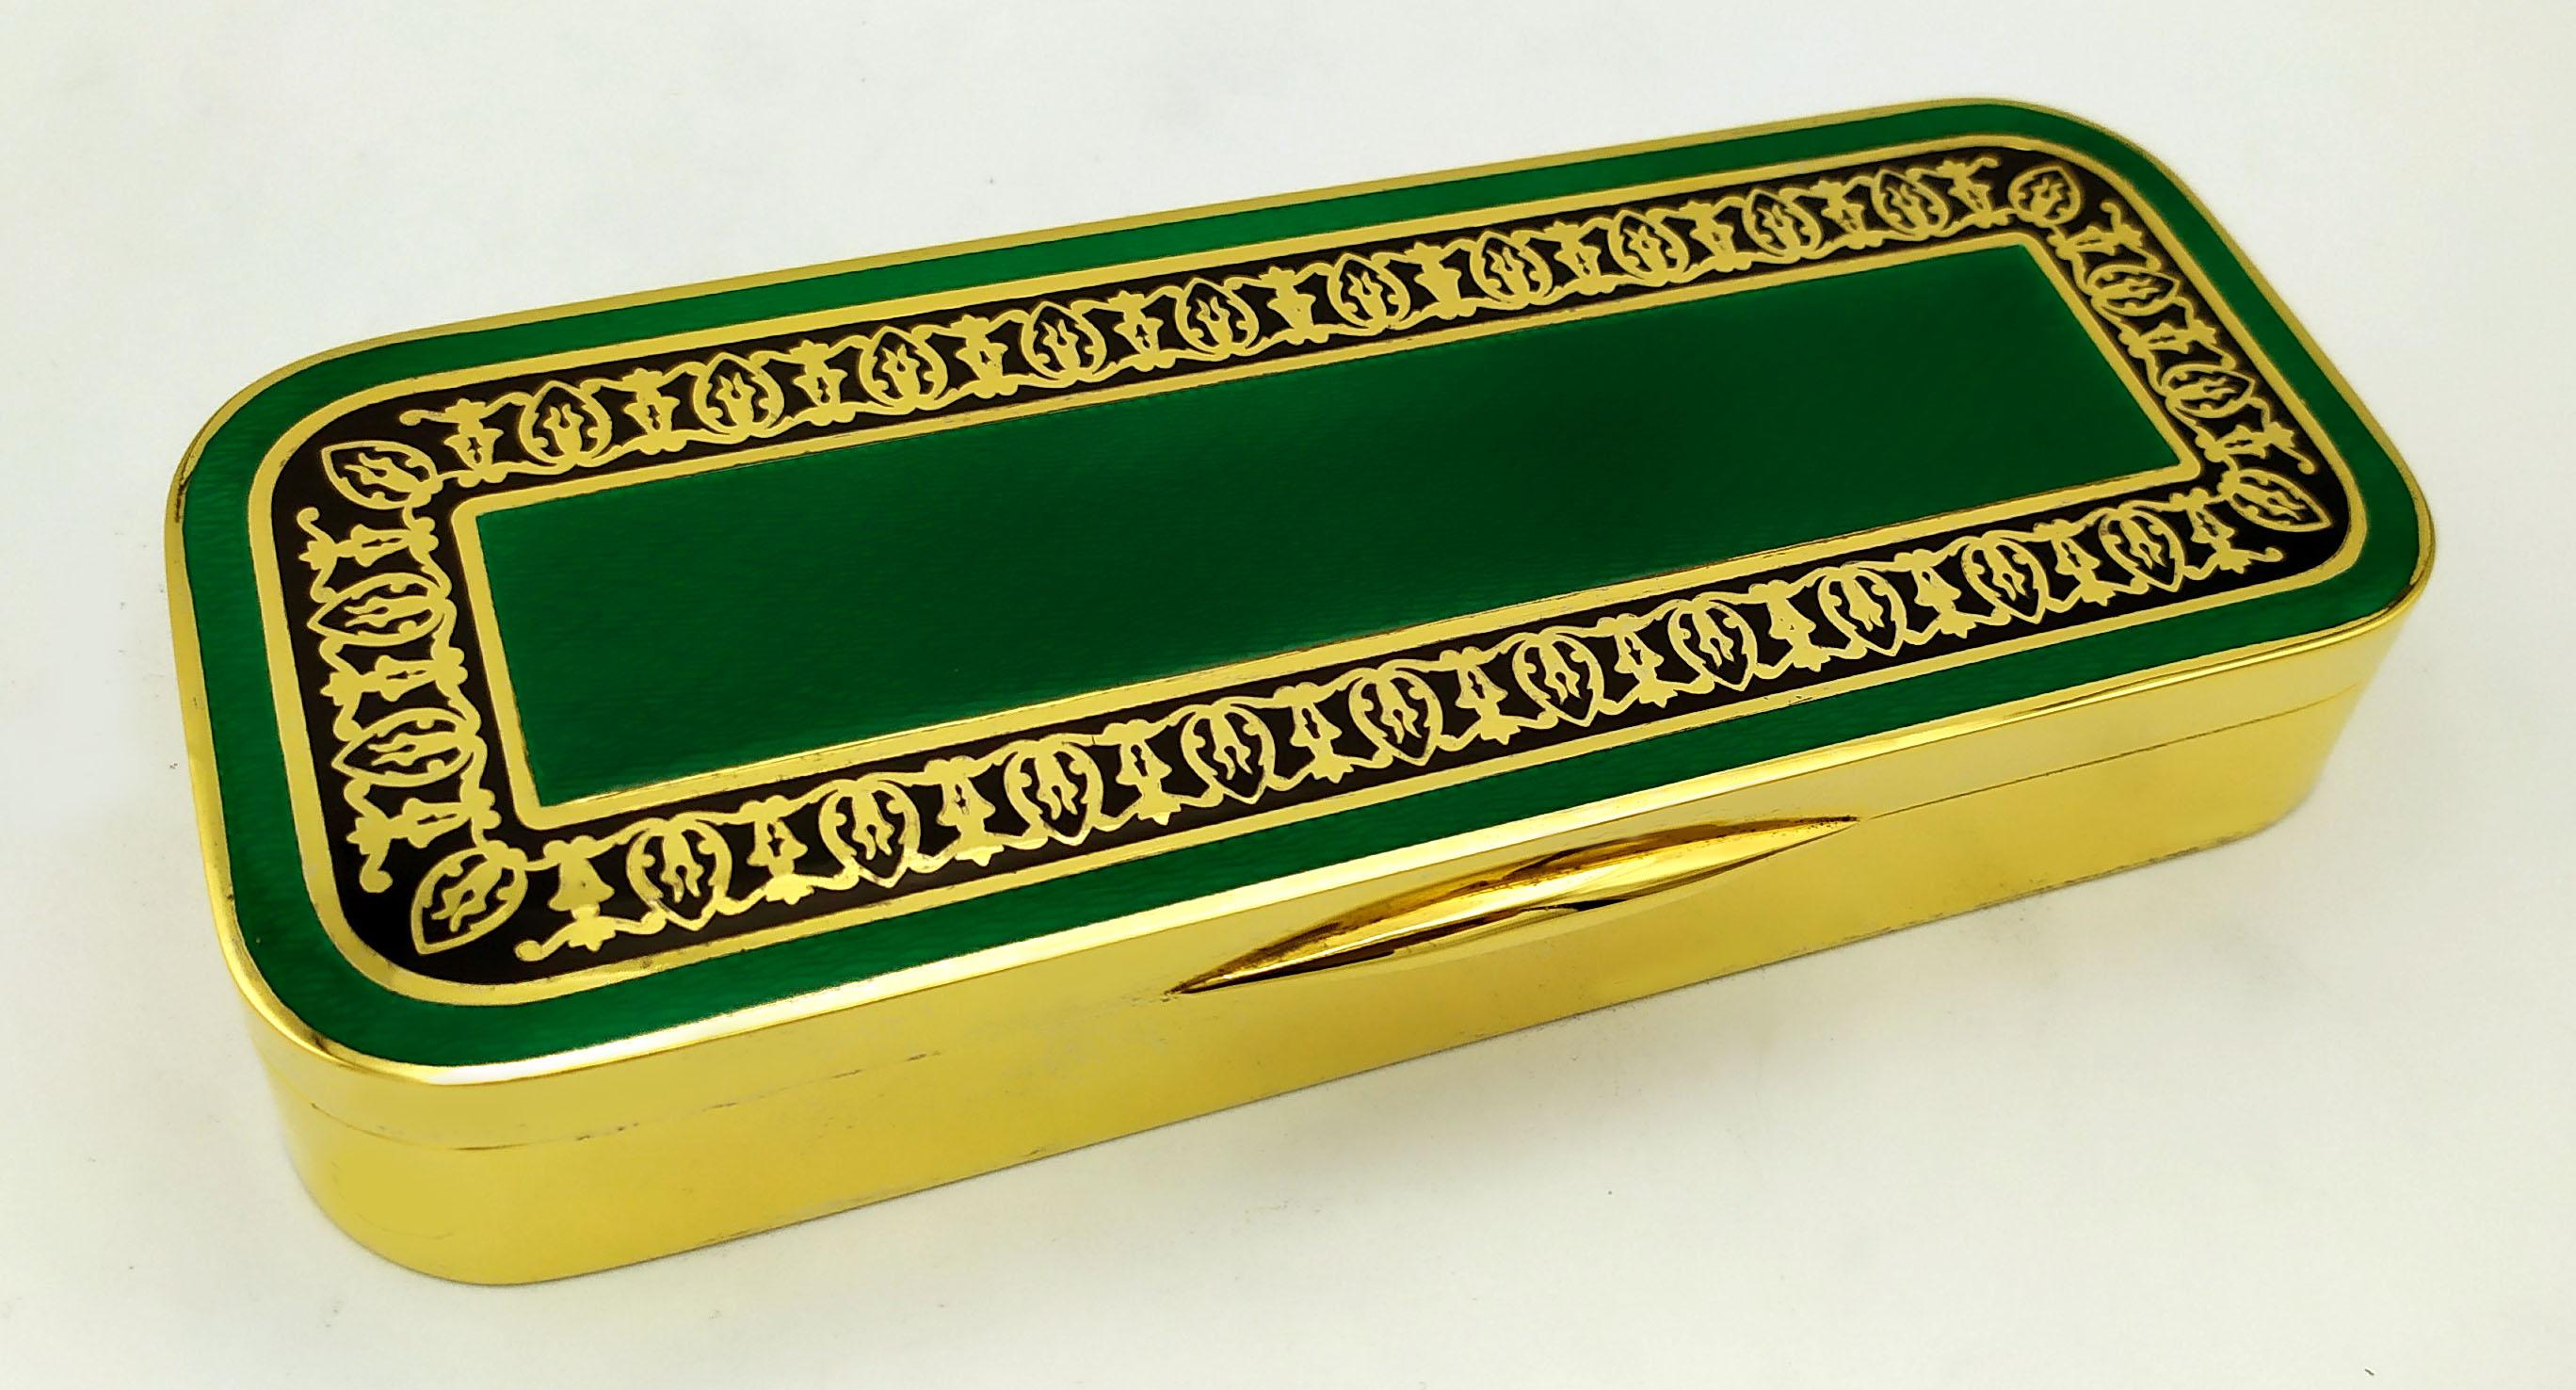 Rectangular box with rounded corners in 925/1000 sterling silver gold plated with translucent fired enamel on guillochè with hand-engraved and enamelled Arab-style ornament. Dimensions cm. 7 x 17 x 2.5. Weight gr. 440. Designed by Giorgio Salimbeni